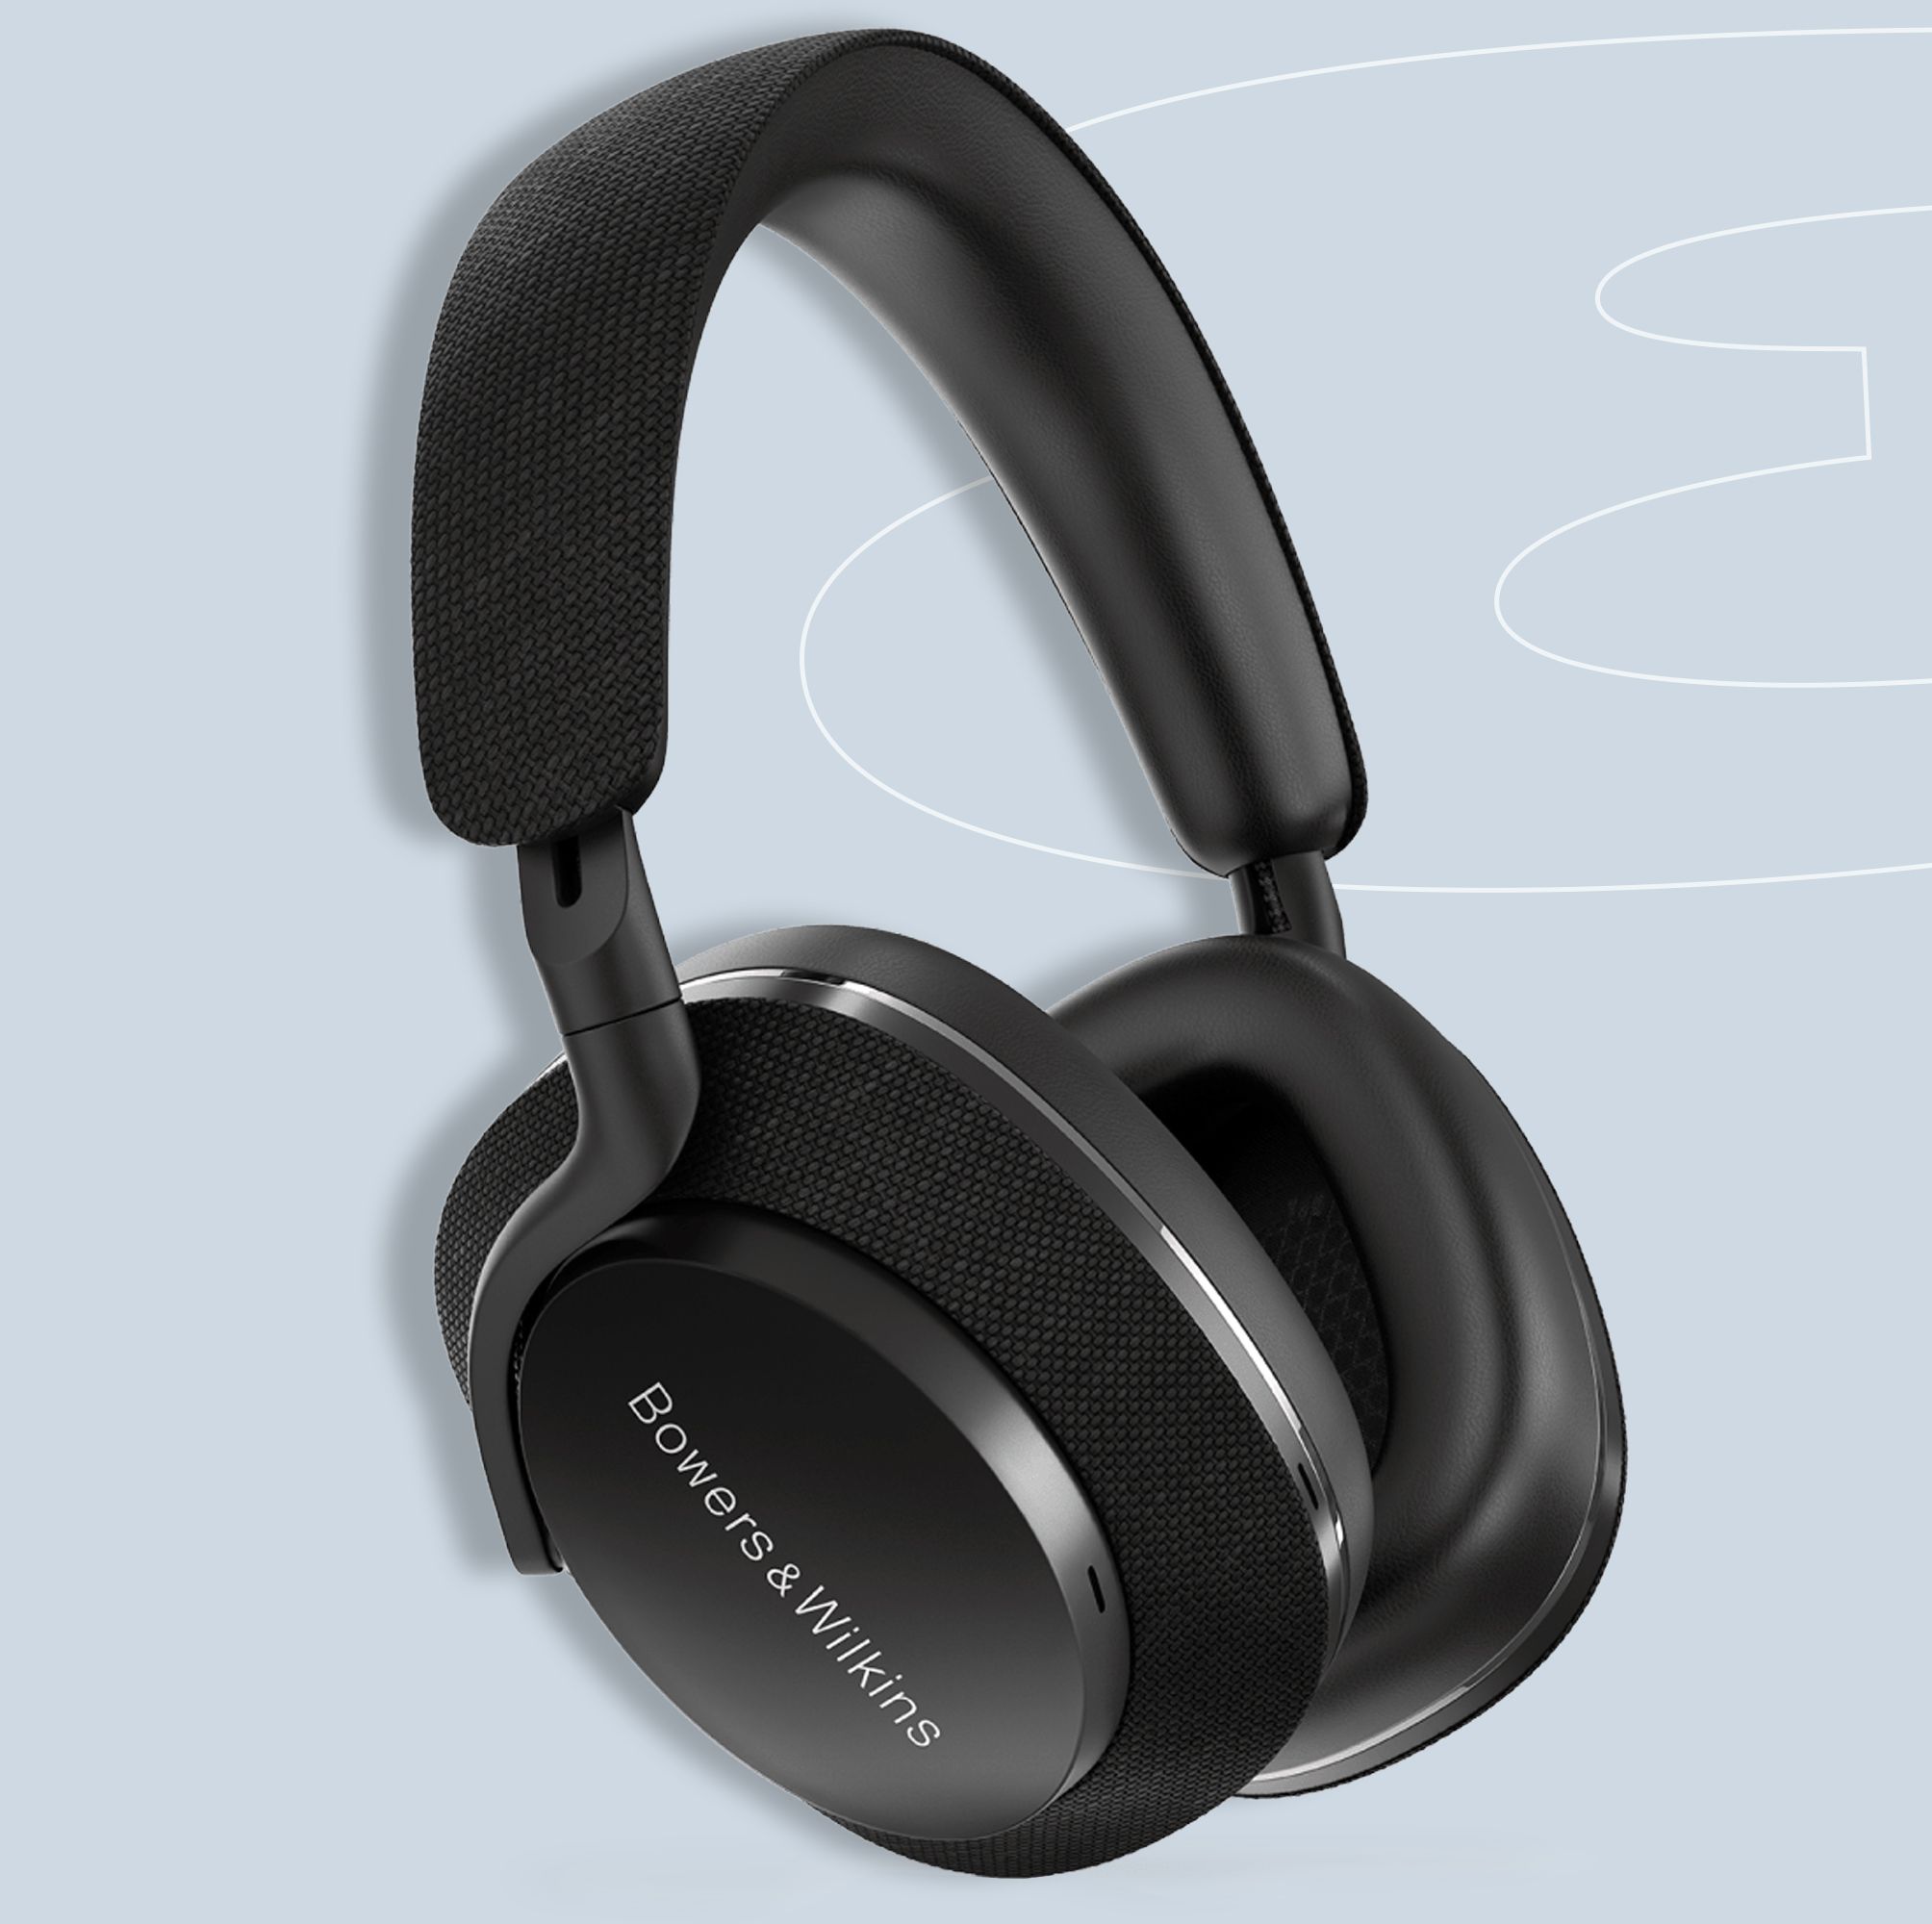 5 Pairs of Noise-Cancelling Headphones to Help You Block Out the World